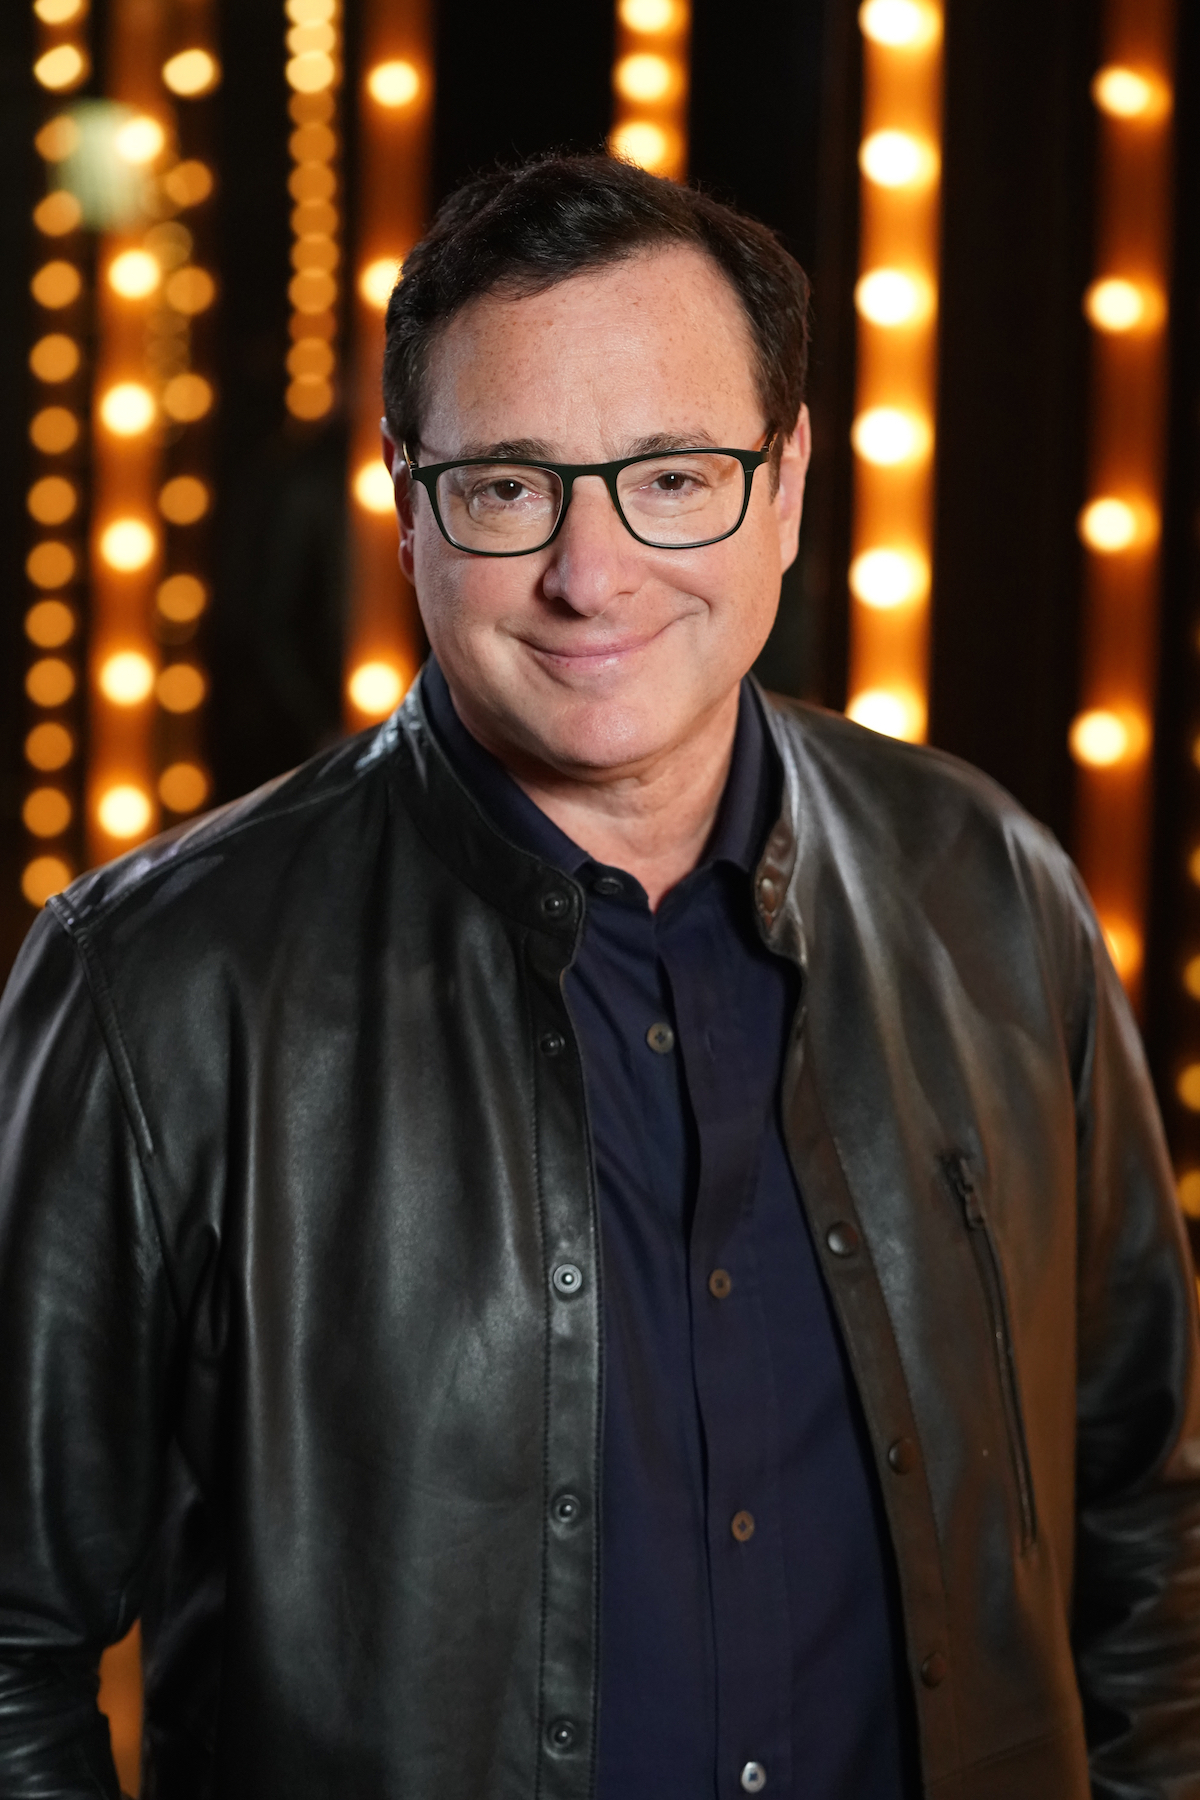 Bob Saget, To Tell the Truth